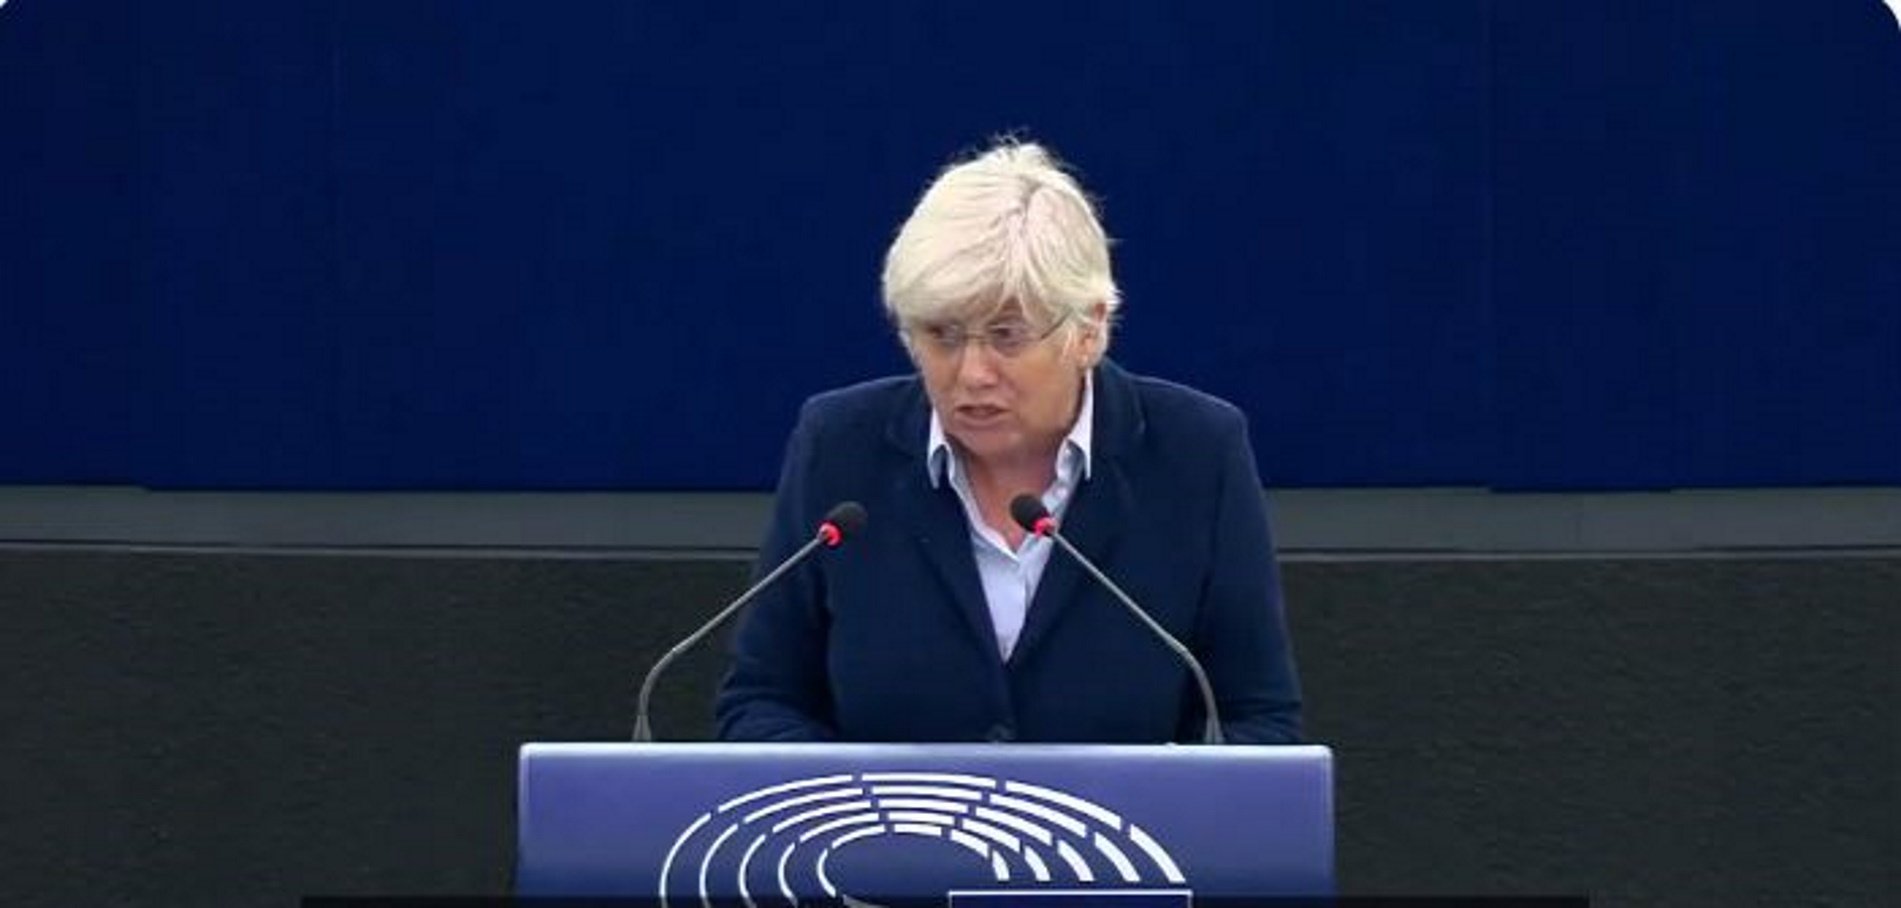 MEP Clara Ponsatí on energy prices: "Spain is a textbook case of what not to do"